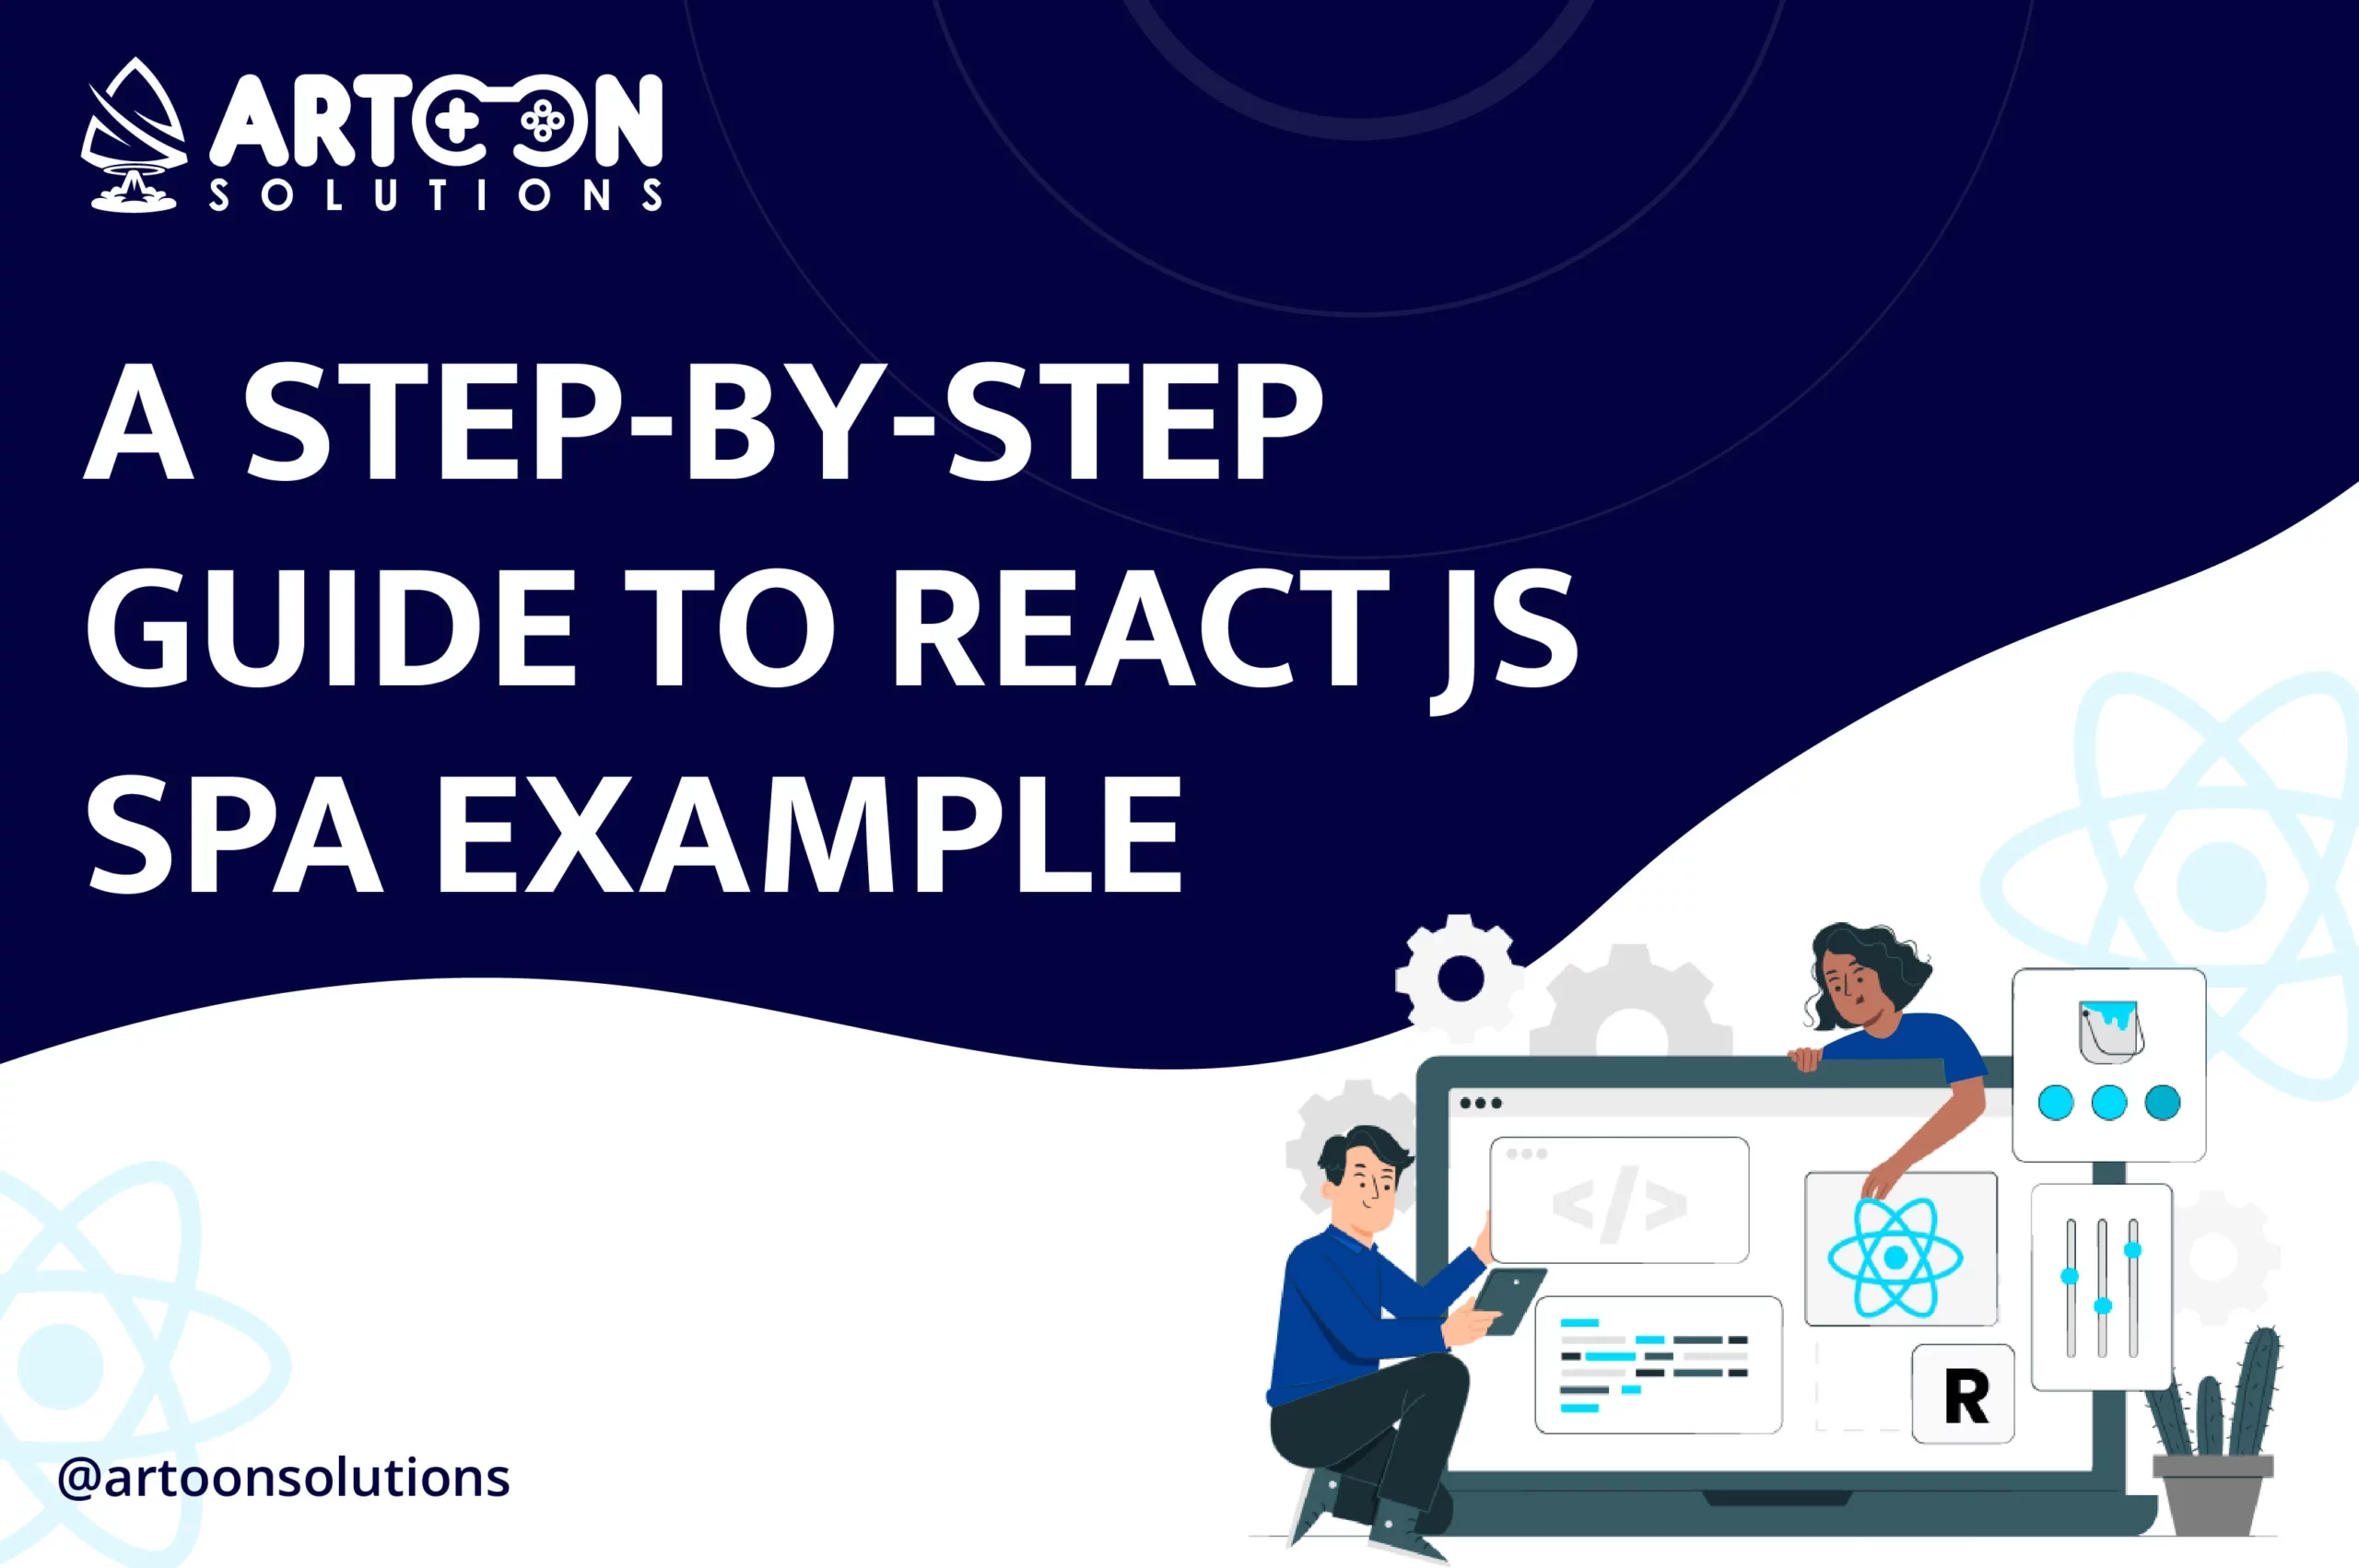 A Step-by-Step Guide to React js Spa